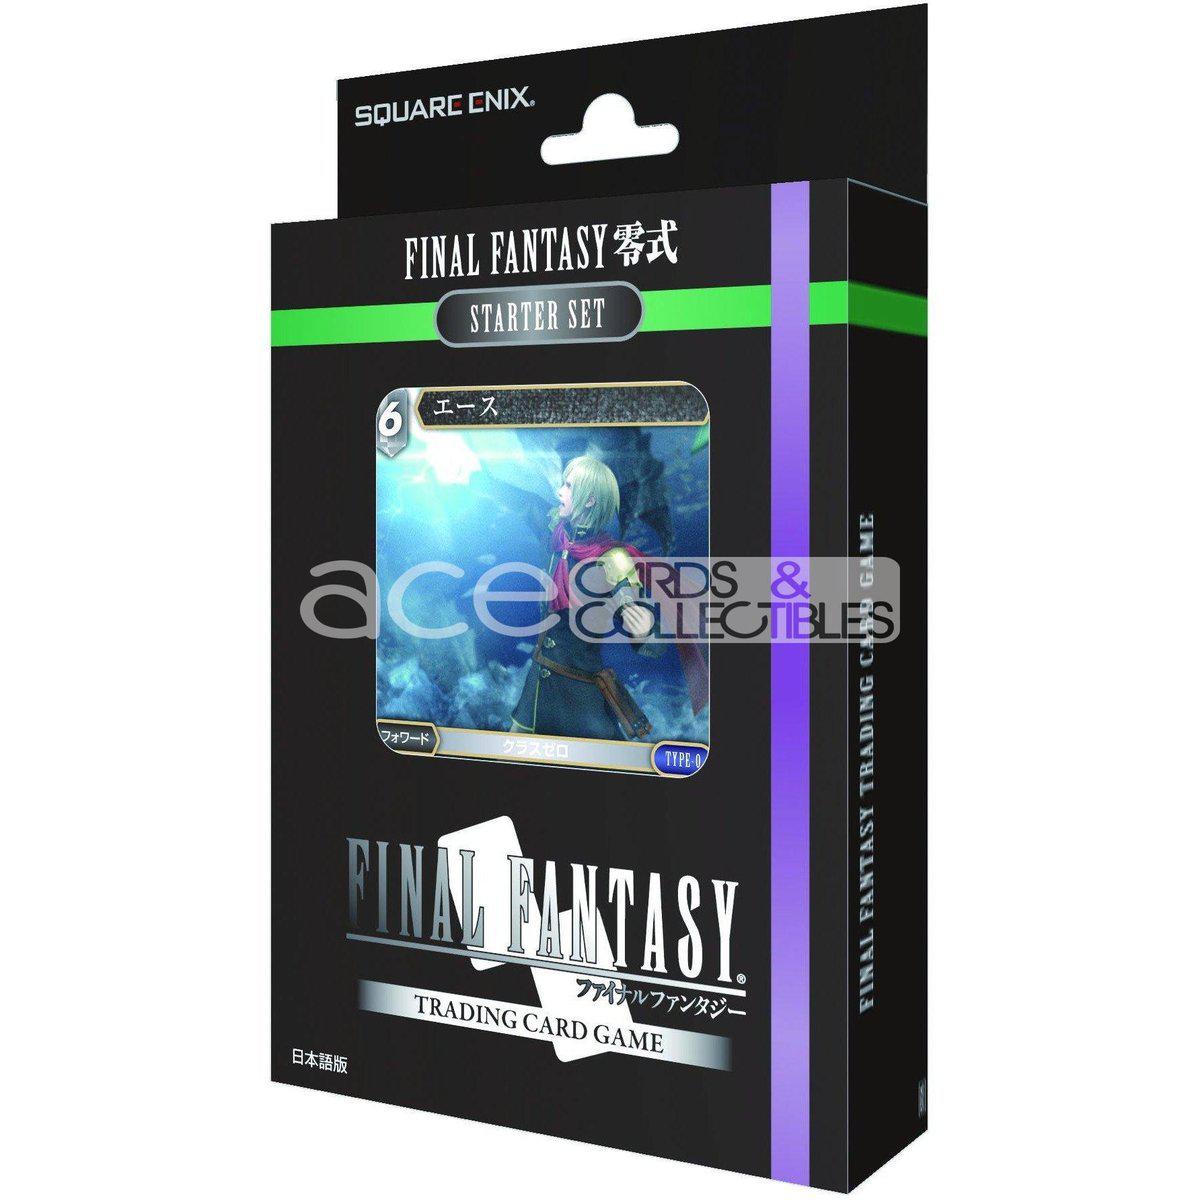 Final Fantasy TCG: Starter Set Final Fantasy Type-0 Deck-Square Enix-Ace Cards & Collectibles